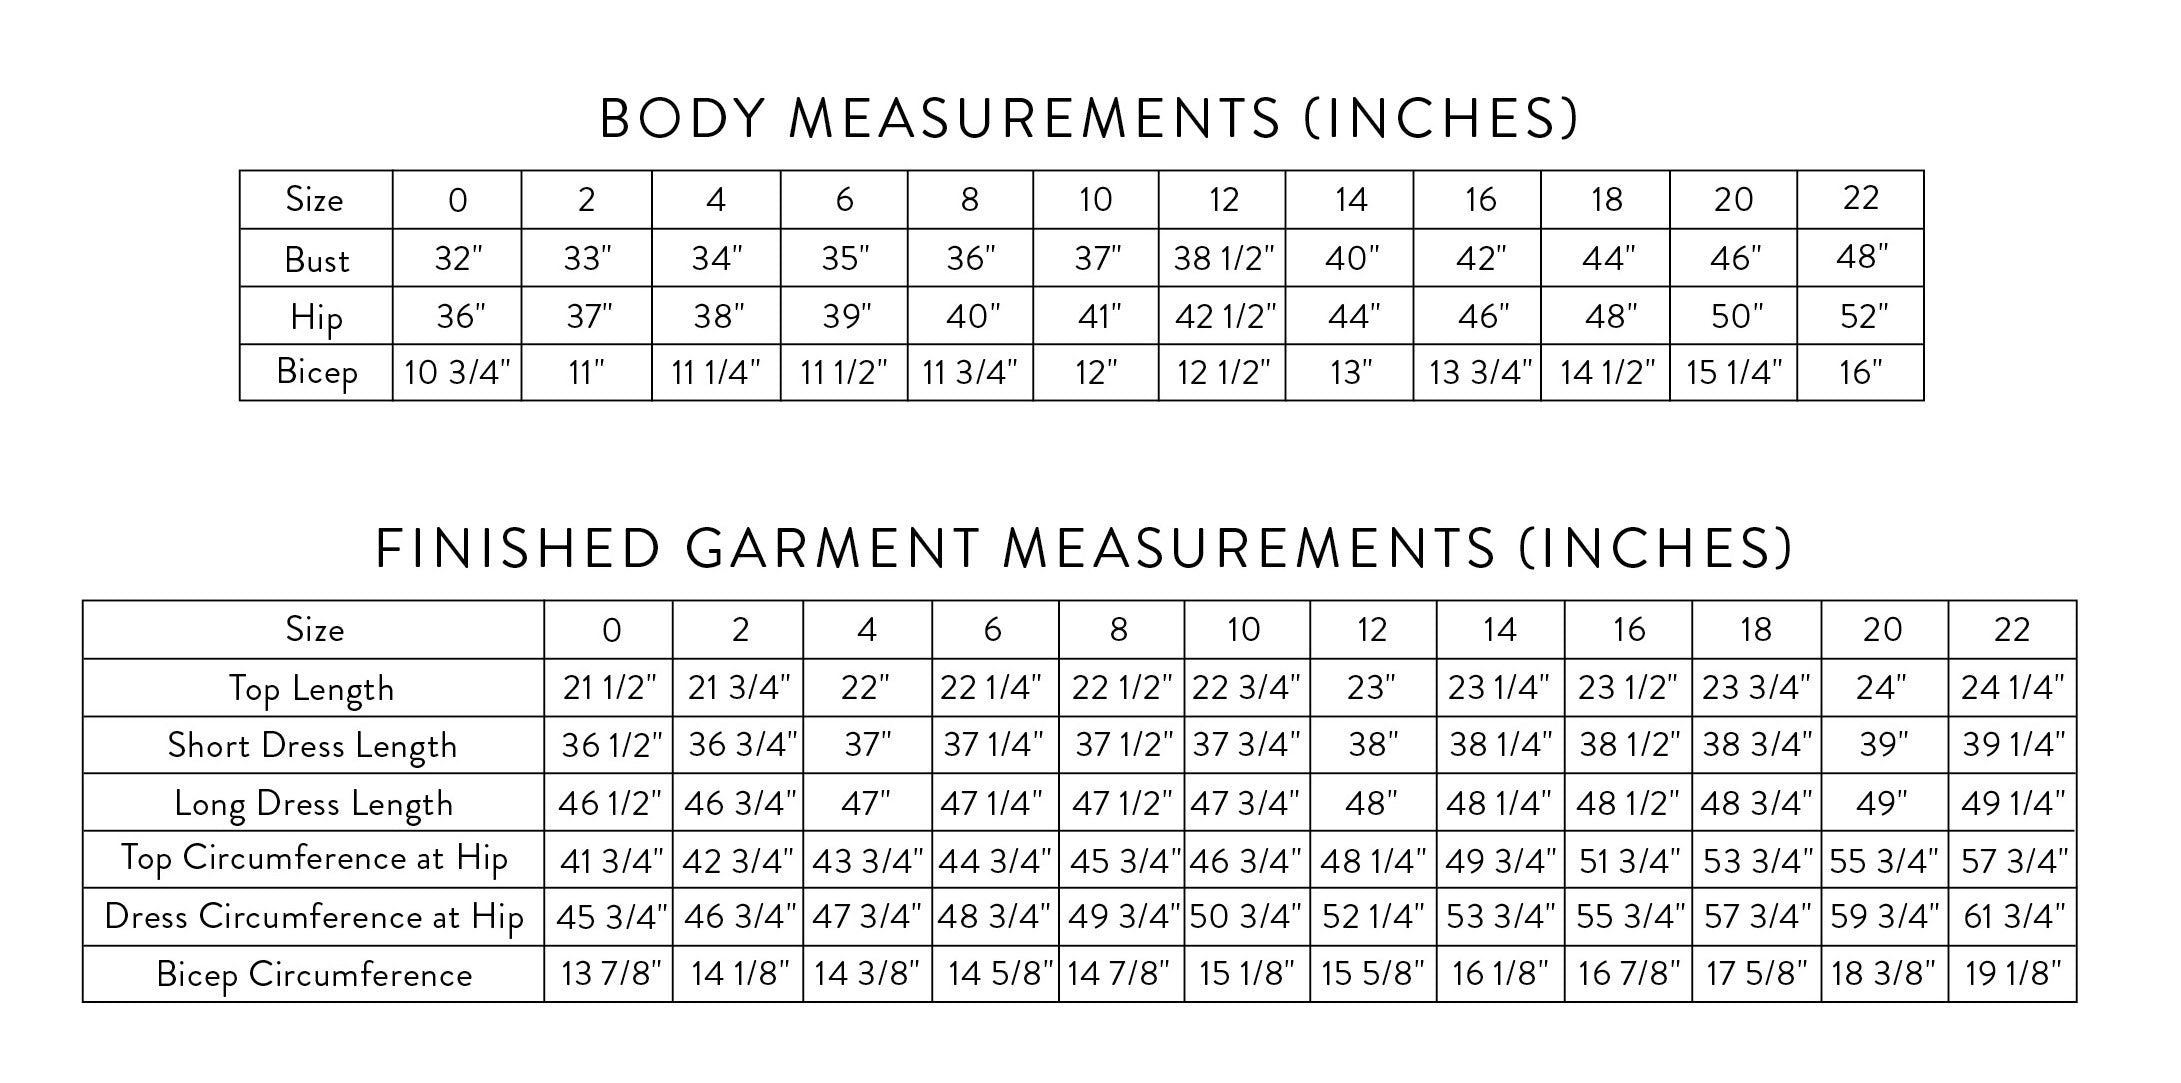 Curvy Couture Size Chart